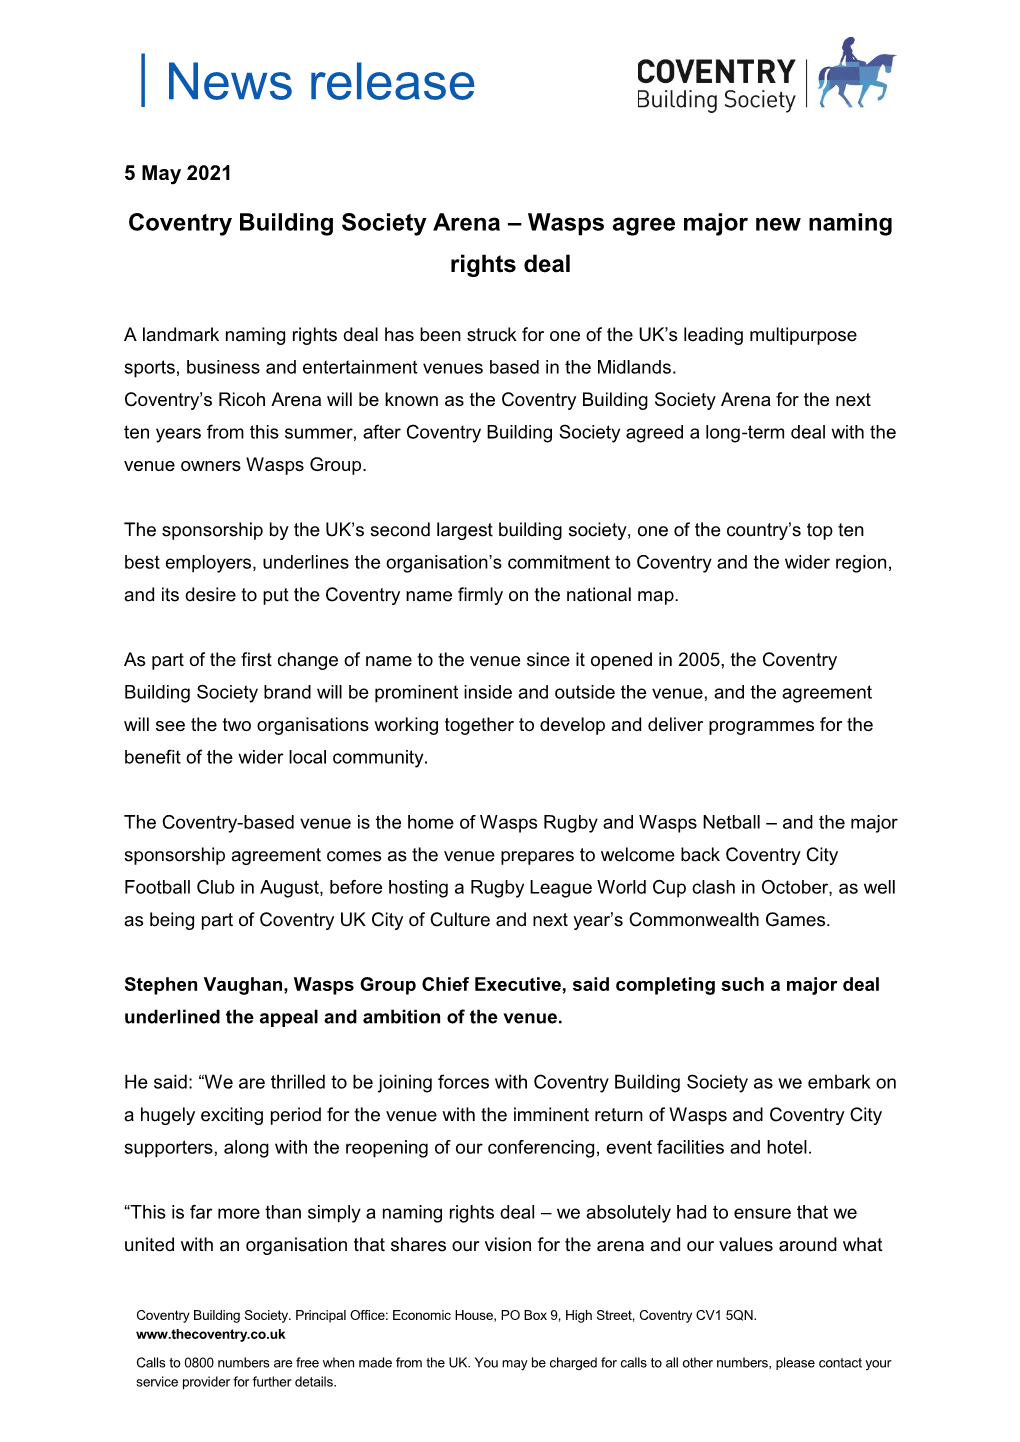 Coventry Building Society Arena – Wasps Agree Major New Naming